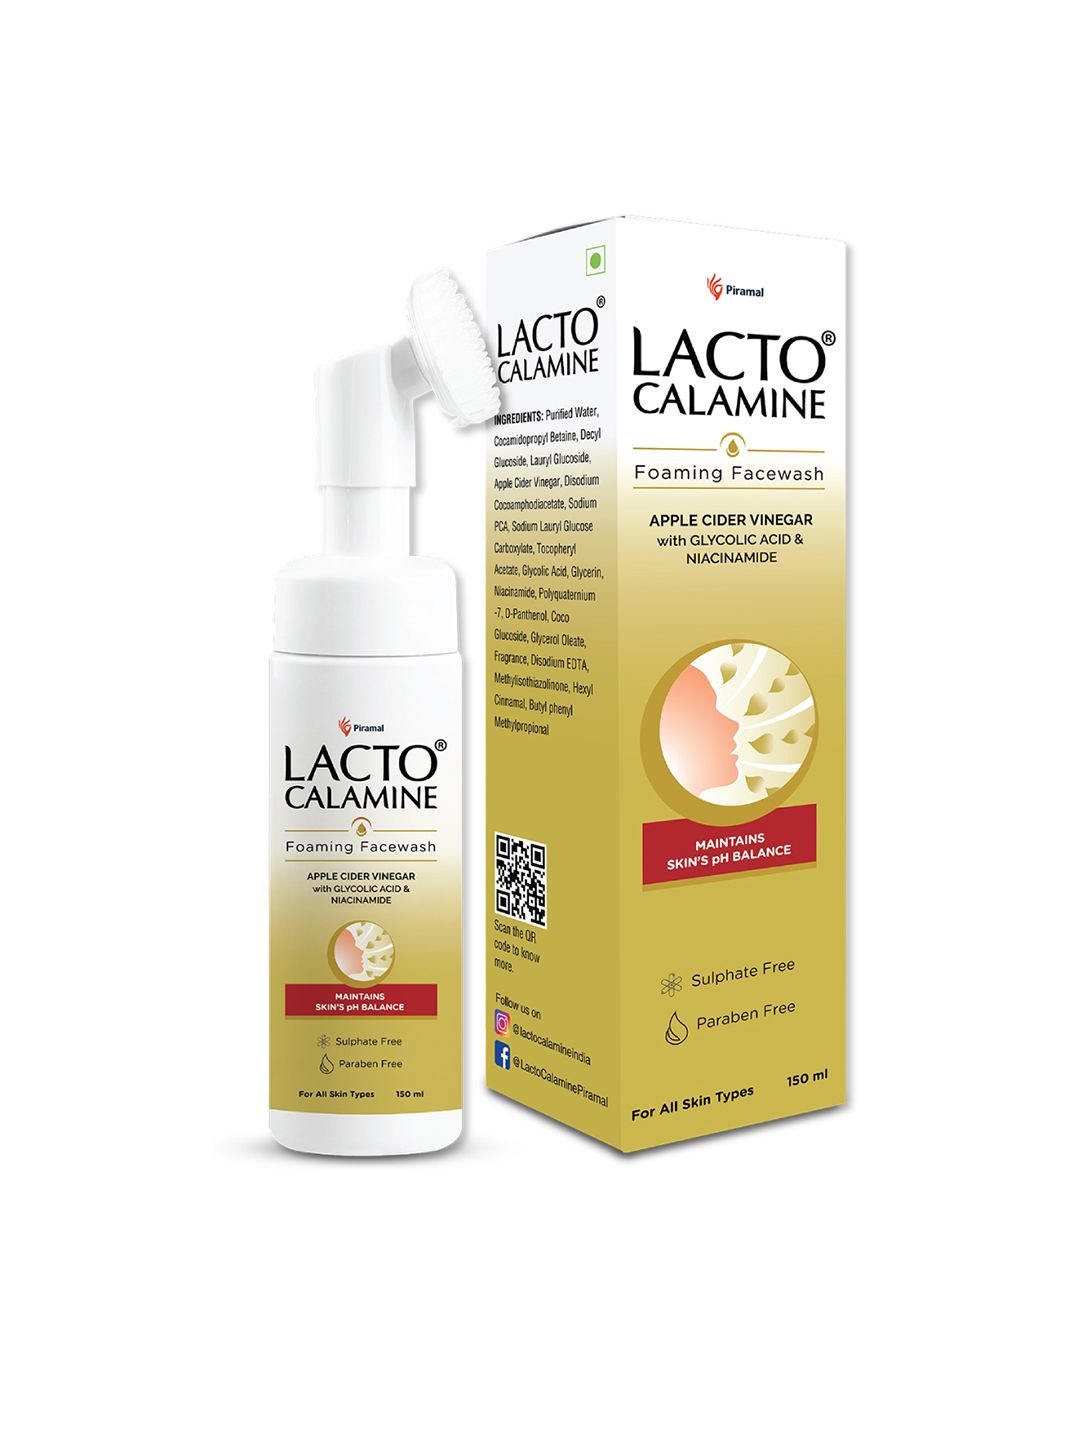 Lacto Calamine Apple Cider Vinegar Foaming Face Wash with Built-In Foaming Brush - 150ml